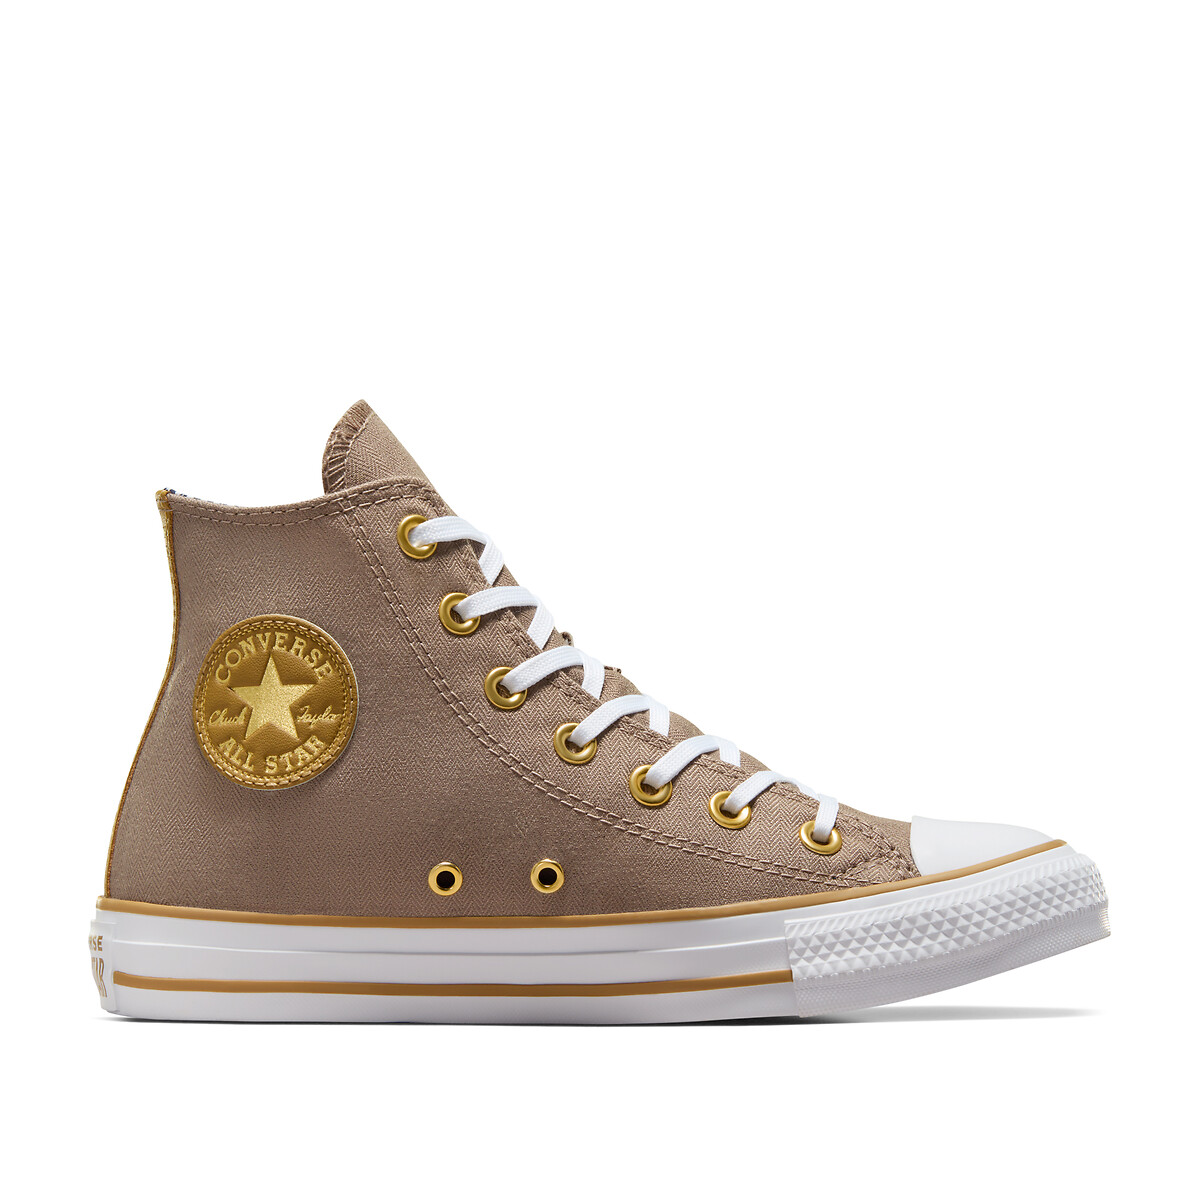 Image of Chuck Taylor All Star Play On Fashion High Top Trainers in Canvas